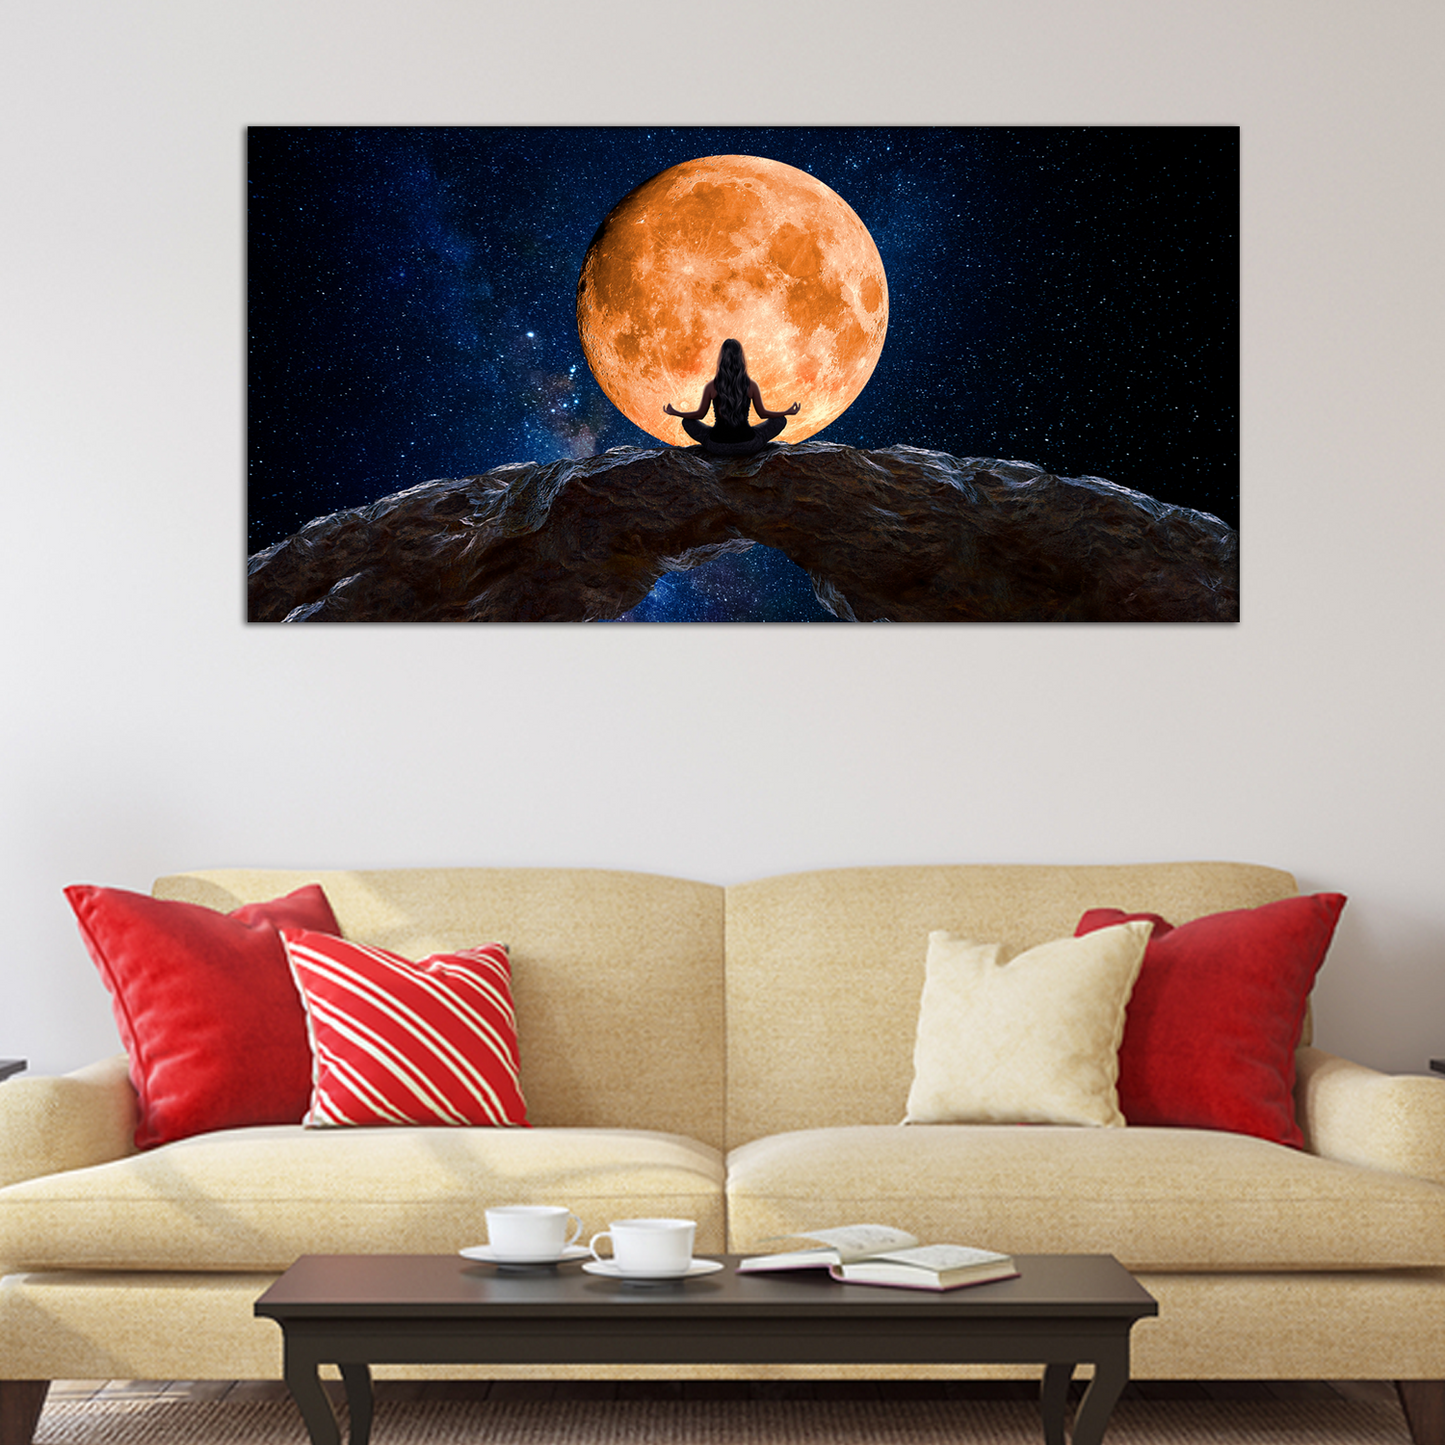 Woman Meditating and Observing the Moon Canvas Print Wall Painting